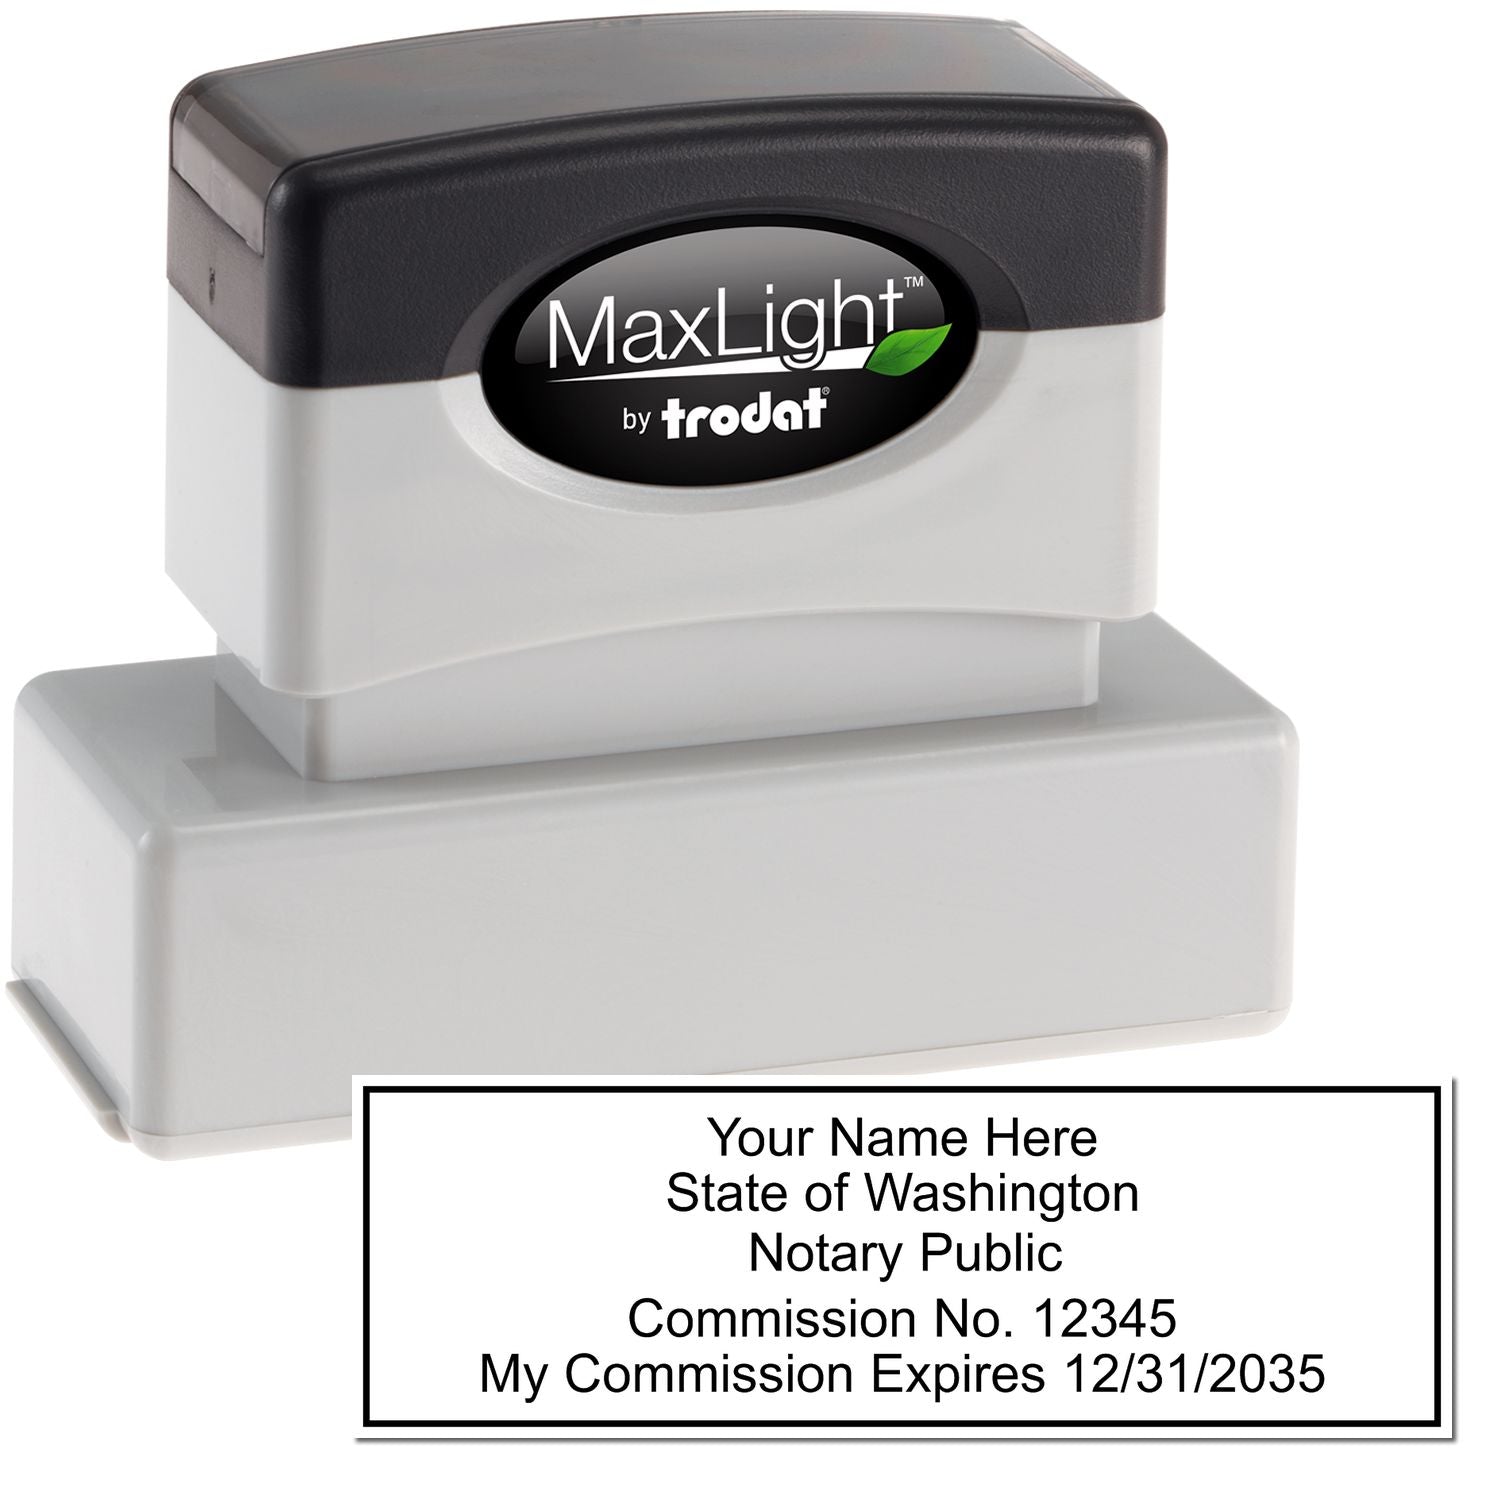 The main image for the MaxLight Premium Pre-Inked Washington Rectangular Notarial Stamp depicting a sample of the imprint and electronic files